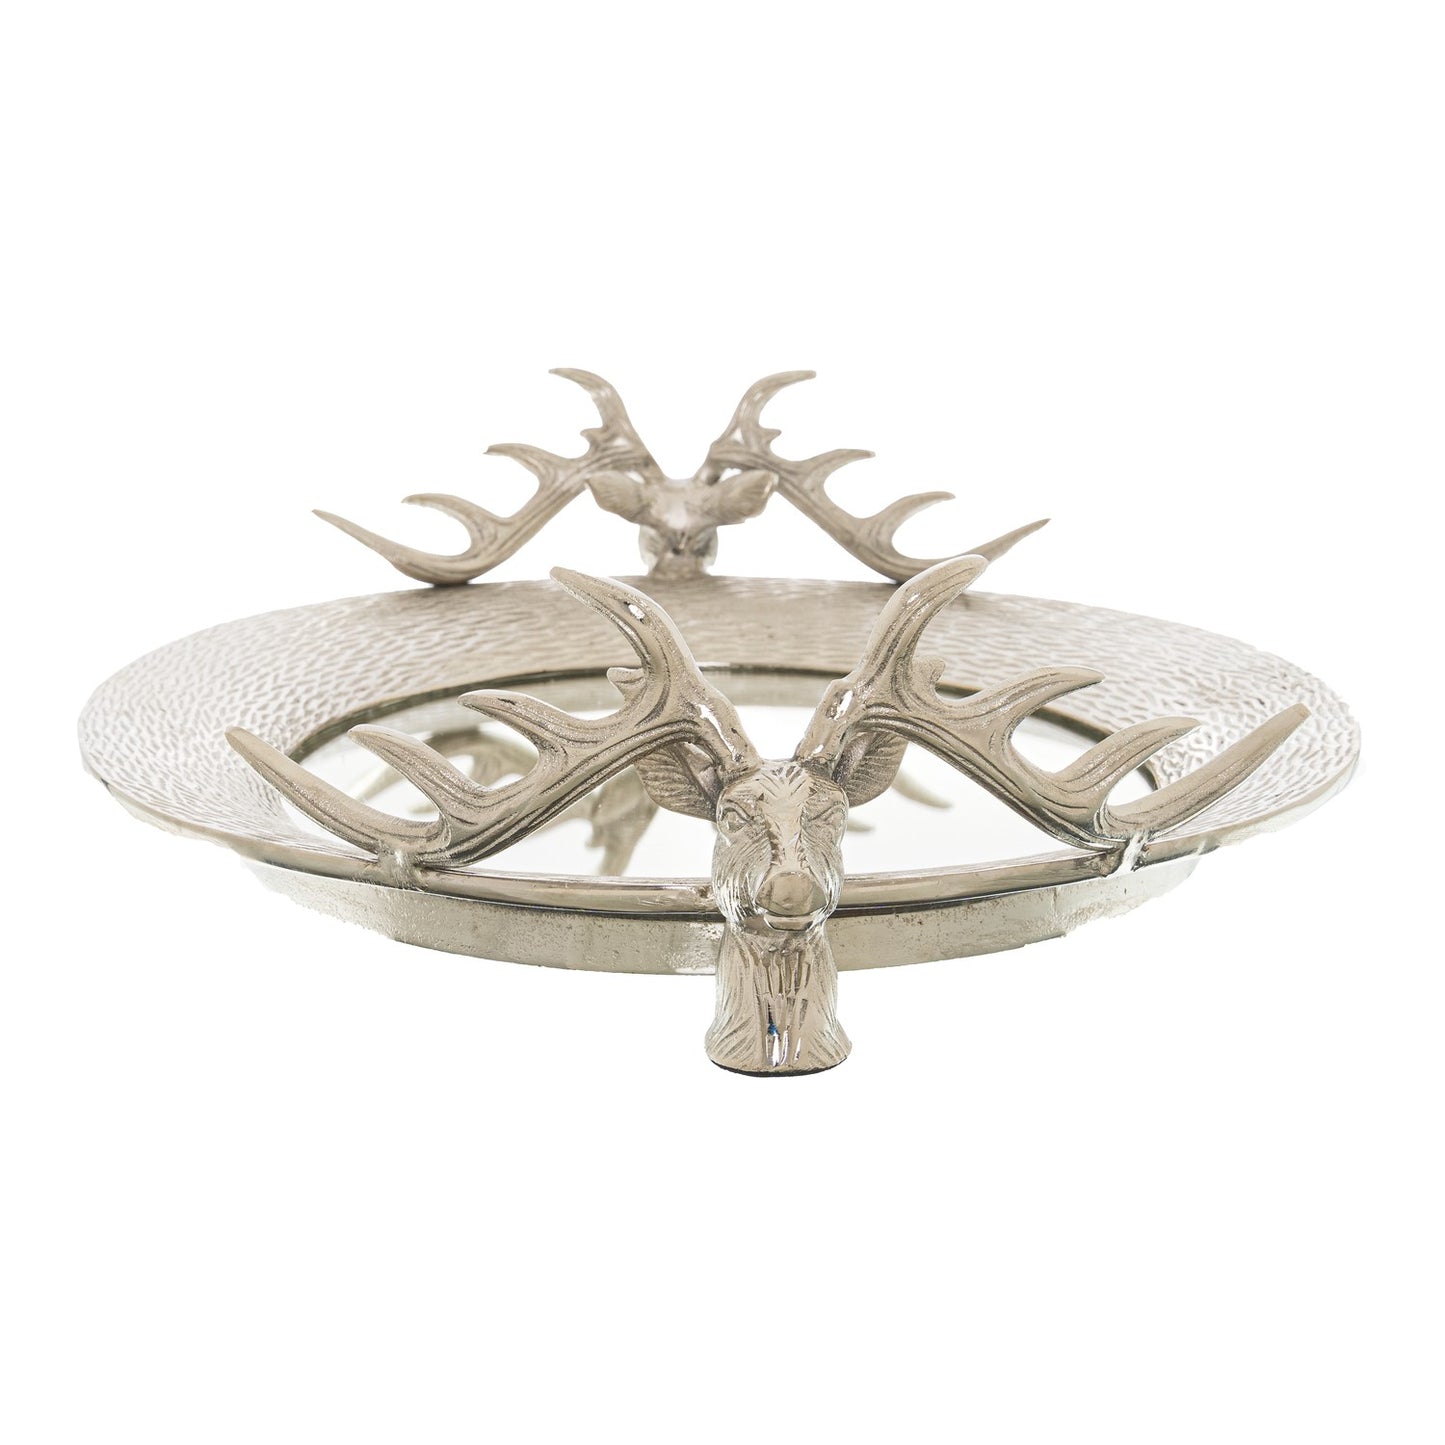 Large Mirrored Tray With Stag Heads